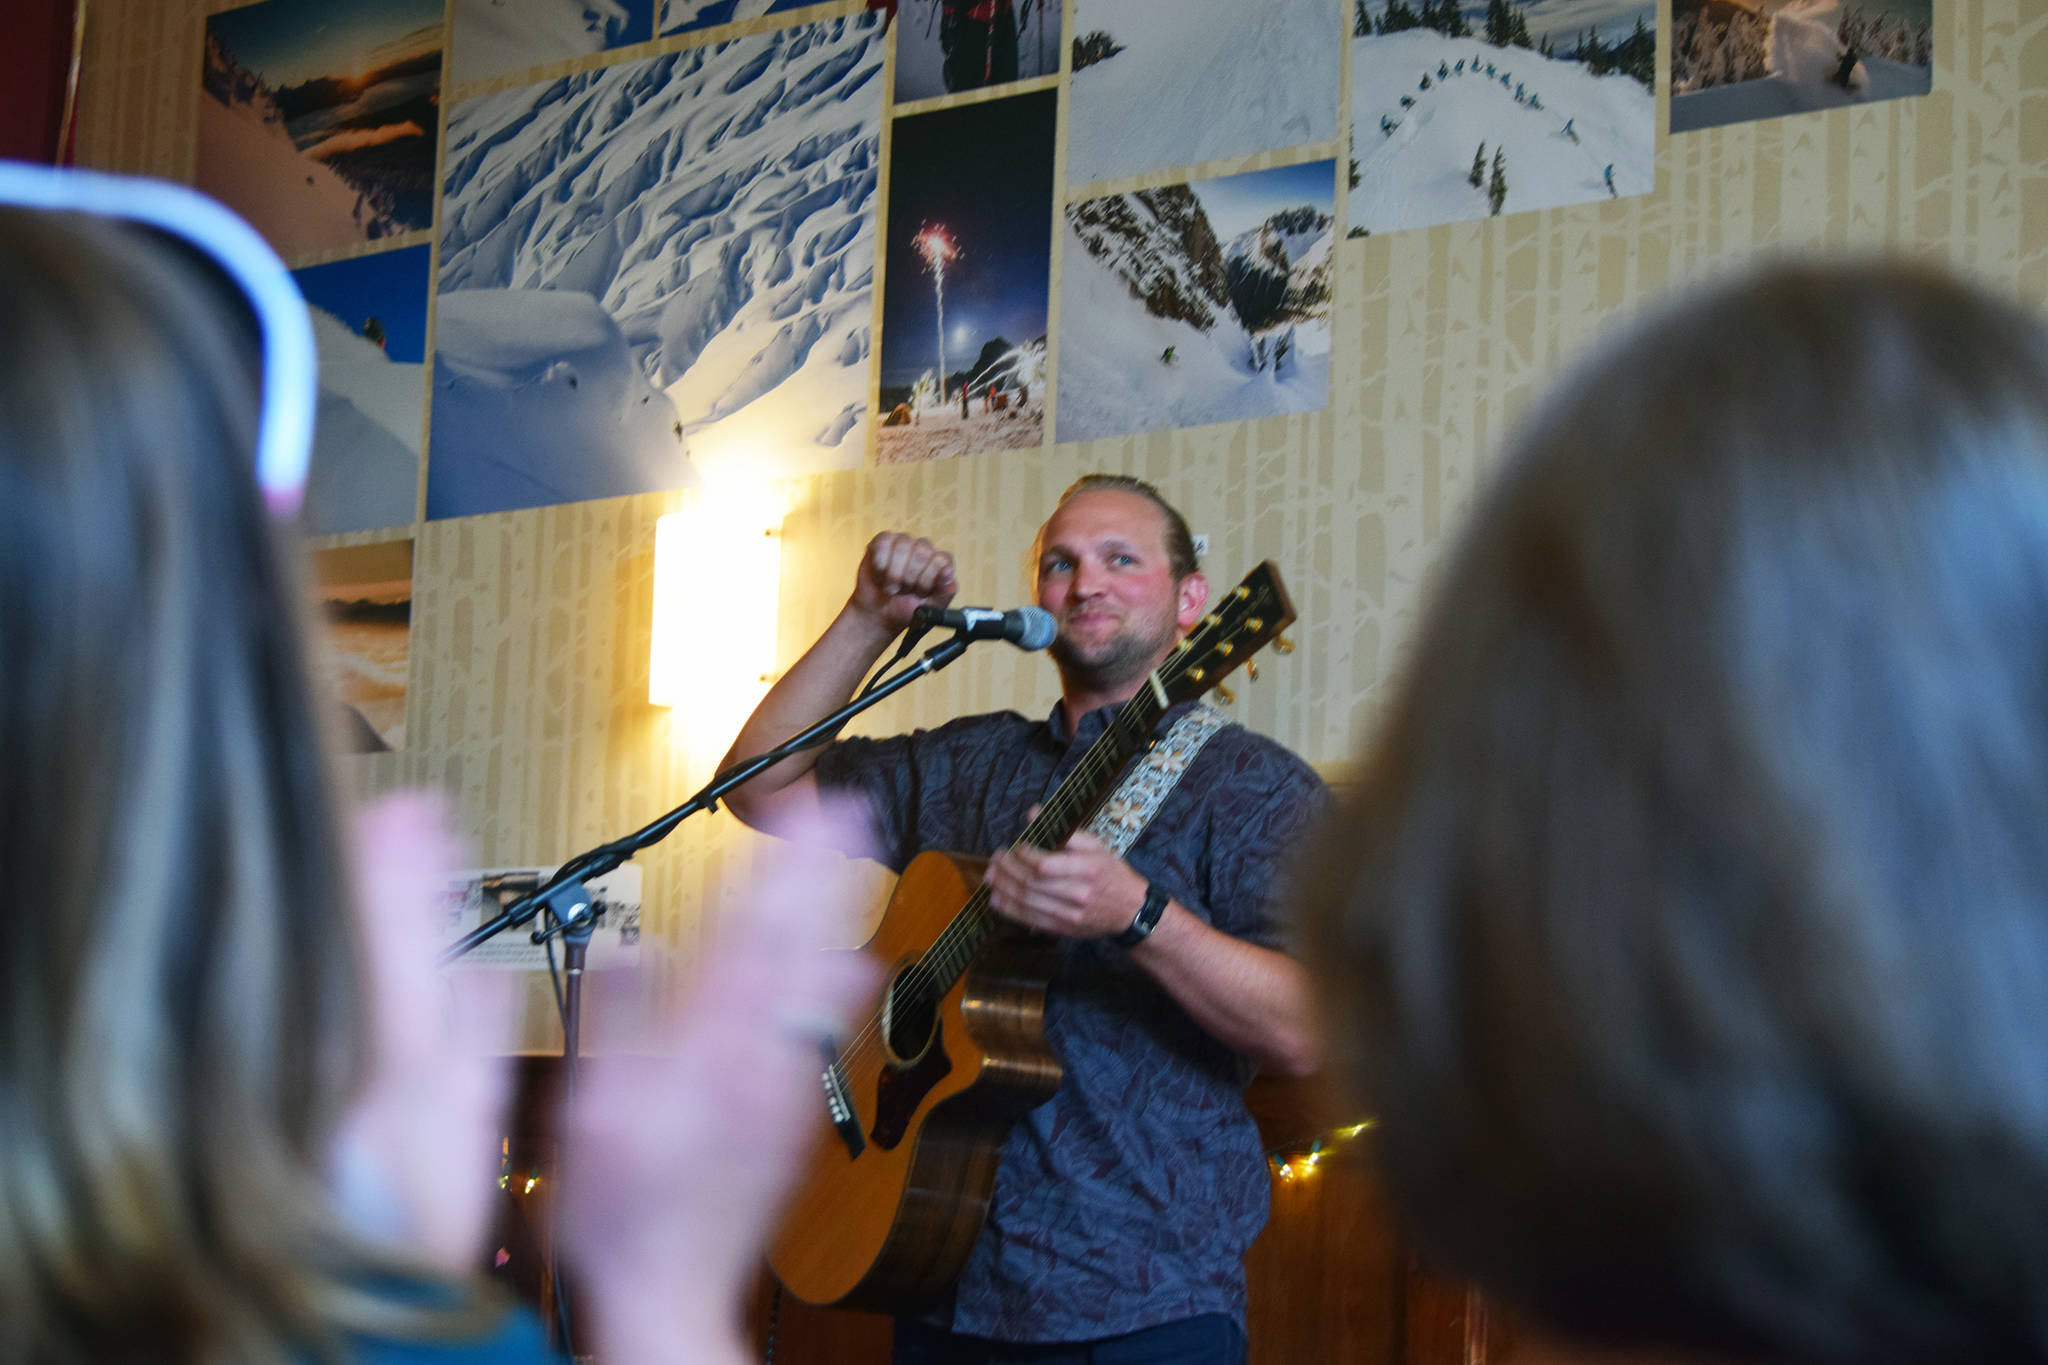 Curtiss O’Rorke Stedman, who performs as Cousin Curtiss, was warmly received at the Rookery Cafe, Wednesday, May 29, 2019. (Ben Hohenstatt | Capital City Weekly)                                Curtiss O’Rorke Stedman, who performs as Cousin Curtiss, was warmly received at the Rookery Cafe, Wednesday, May 29, 2019. (Ben Hohenstatt | Capital City Weekly)